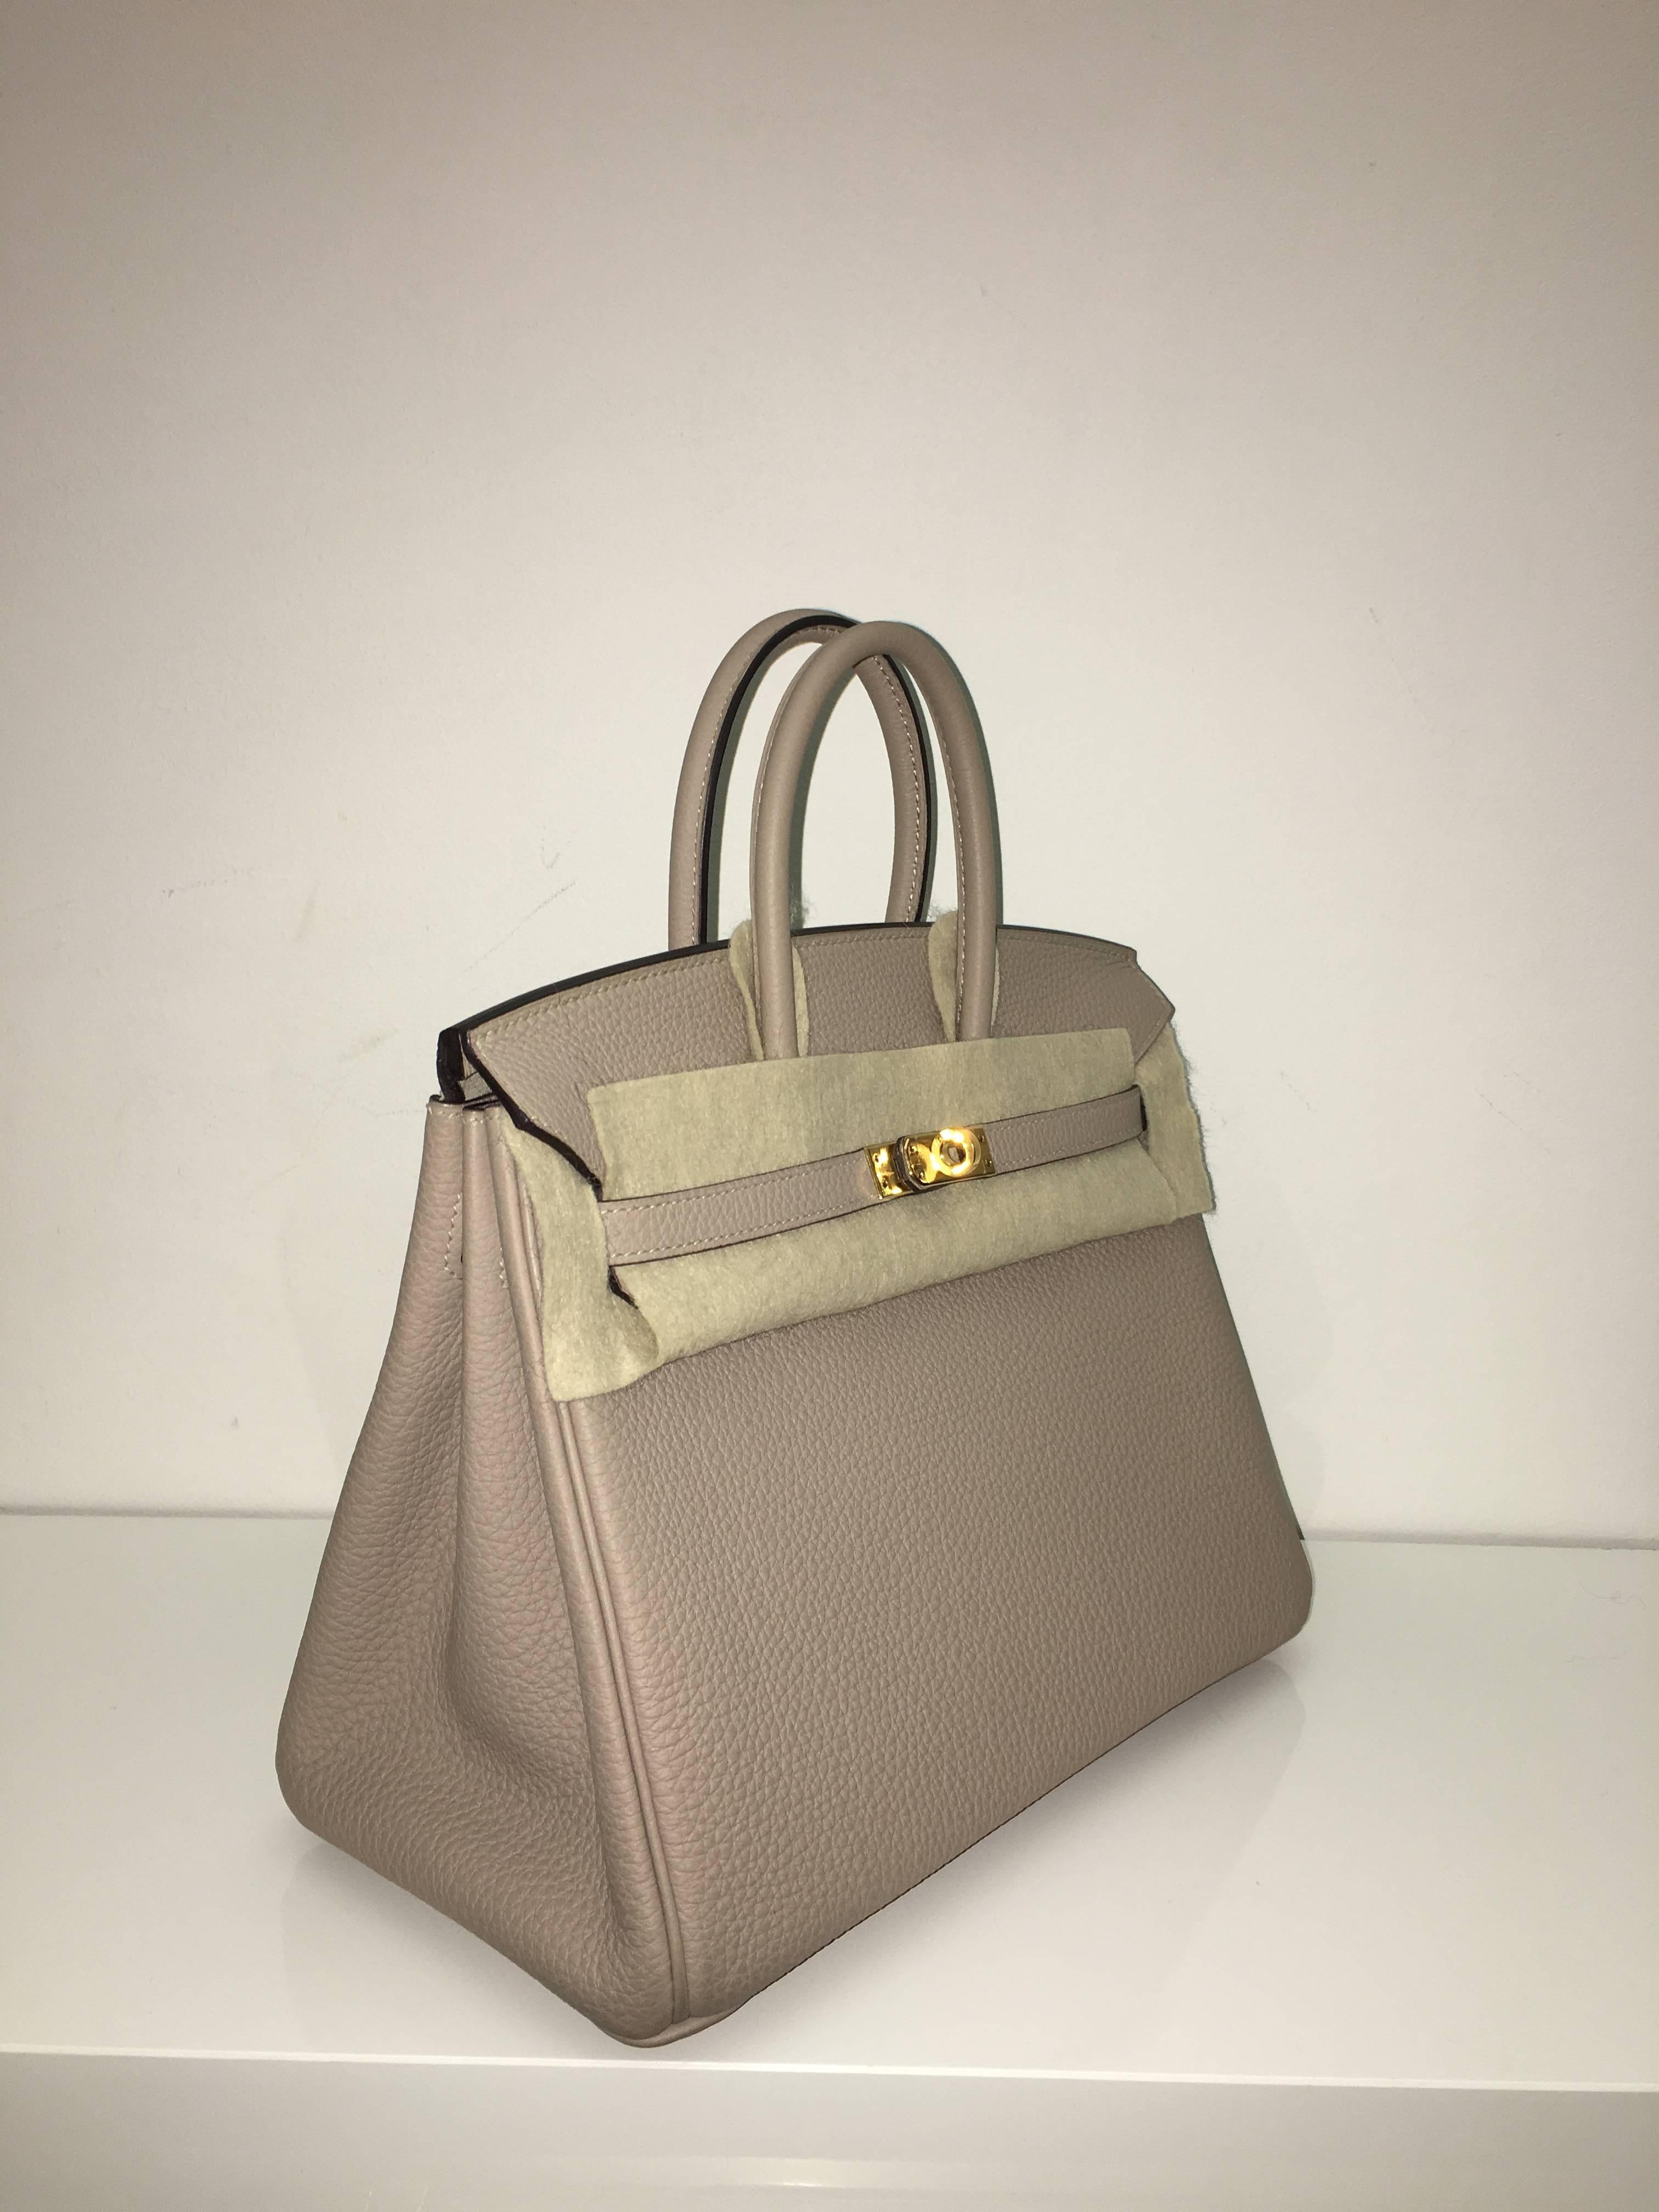 Hermes 
Birkin Size 25
Togo Leather 
Colour Gris Tourterelle
Gold Hardware 
store fresh, comes with receipt and full set (dust bag, box...) 
Hydeparkfashion specializes in sourcing and delivering authentic luxury handbags, mainly Hermes, to